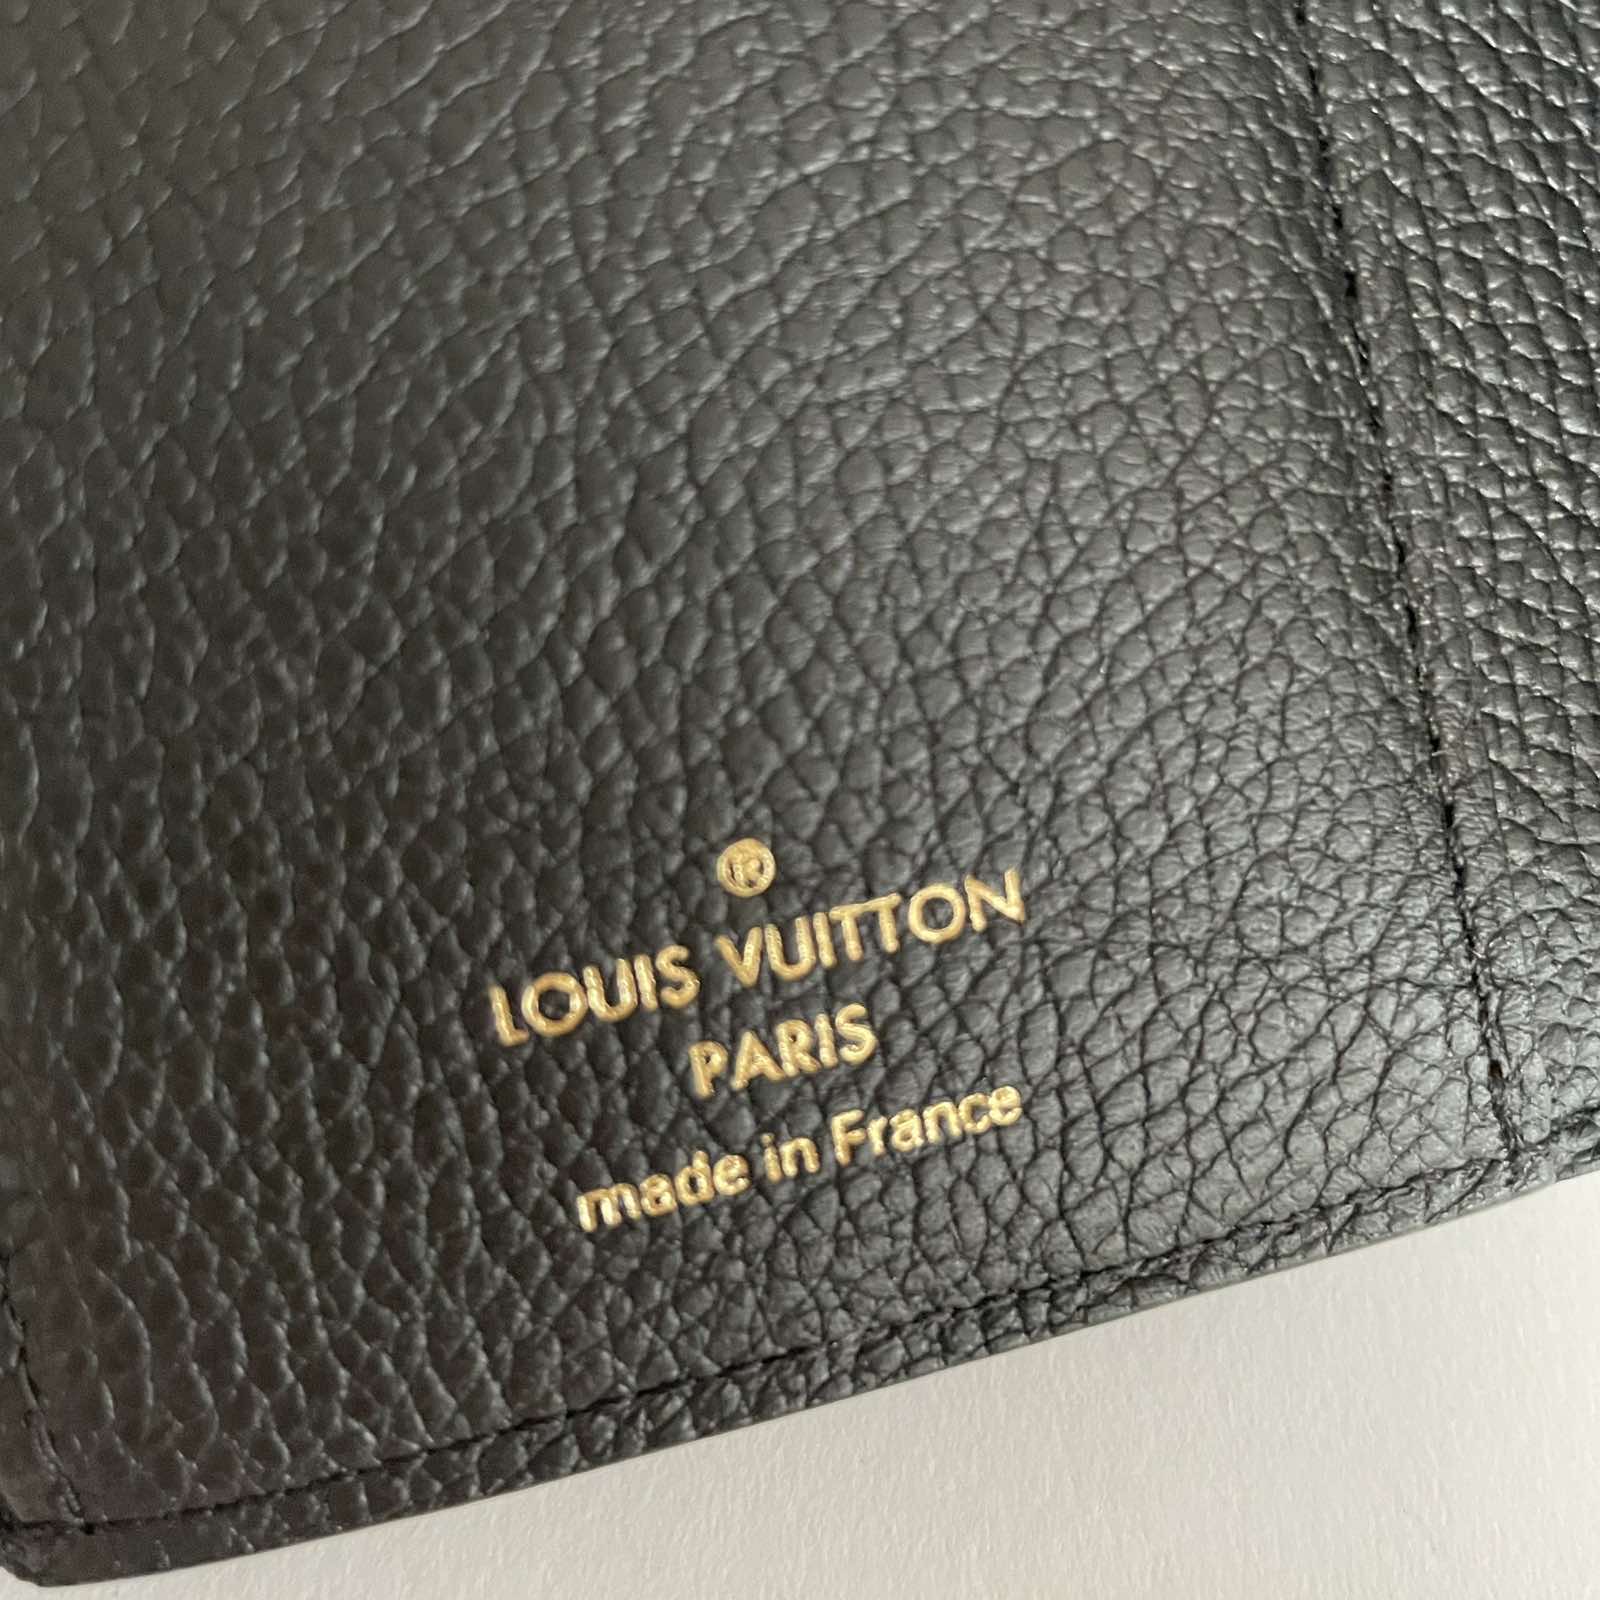 Louis Vuitton Bicolor Empreinte Compact Wallet. Microchip. Made in France.  With box & certificate of authenticity from ENTRUPY ❤️